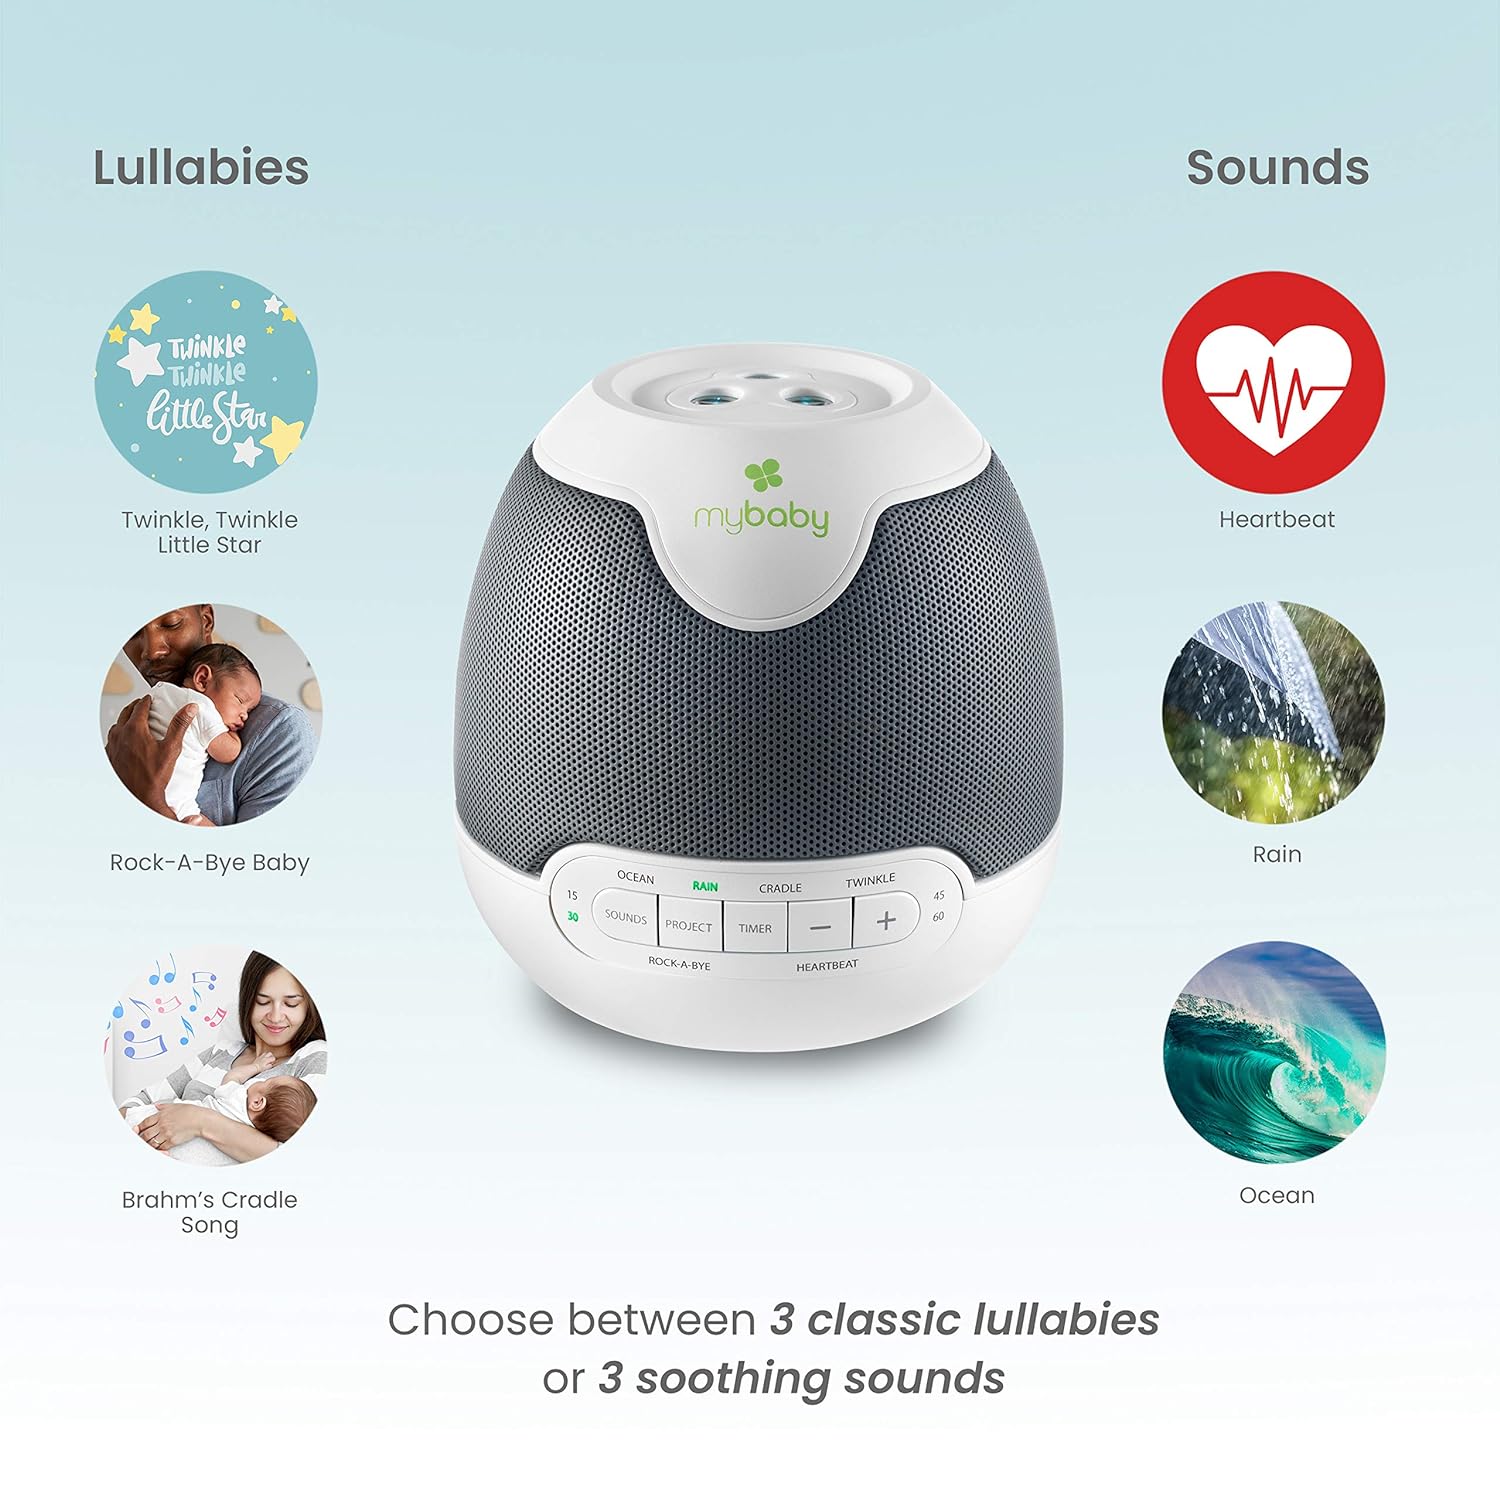 Appraisal of MyBaby Lullaby Sound Machine & Projector